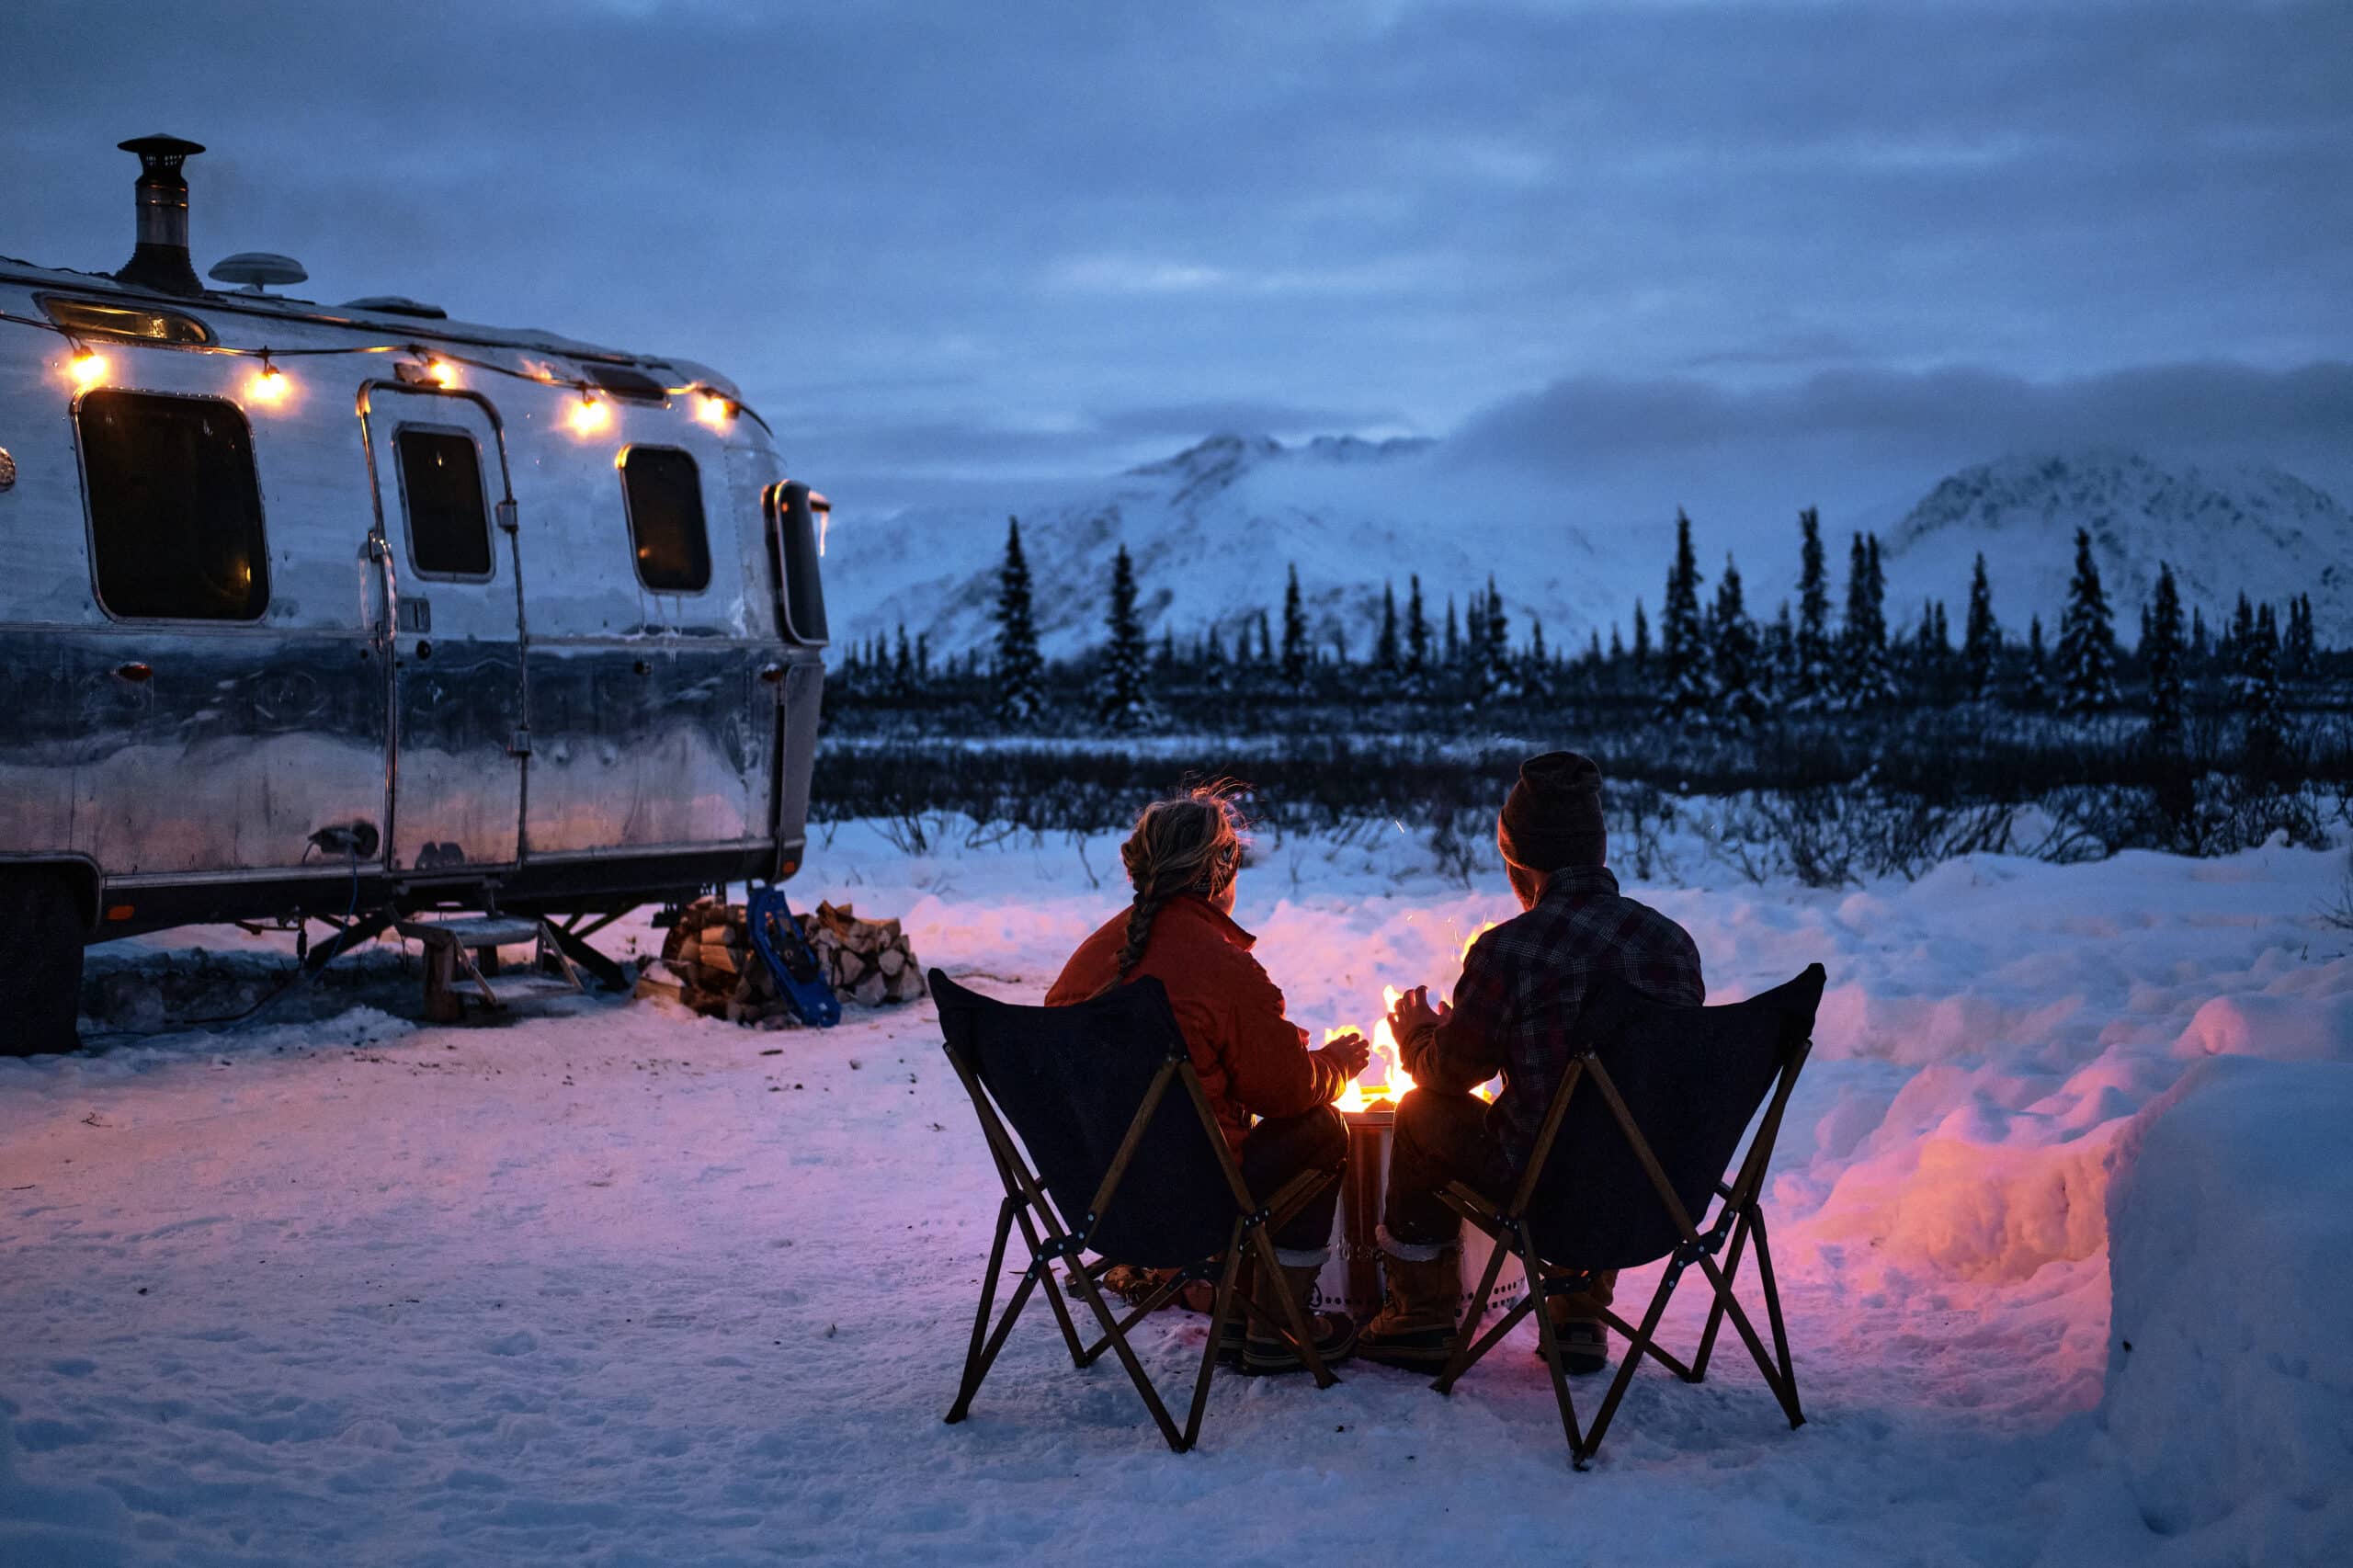 Two People Enjoying a Campfire in the Snow at Night in Alaska